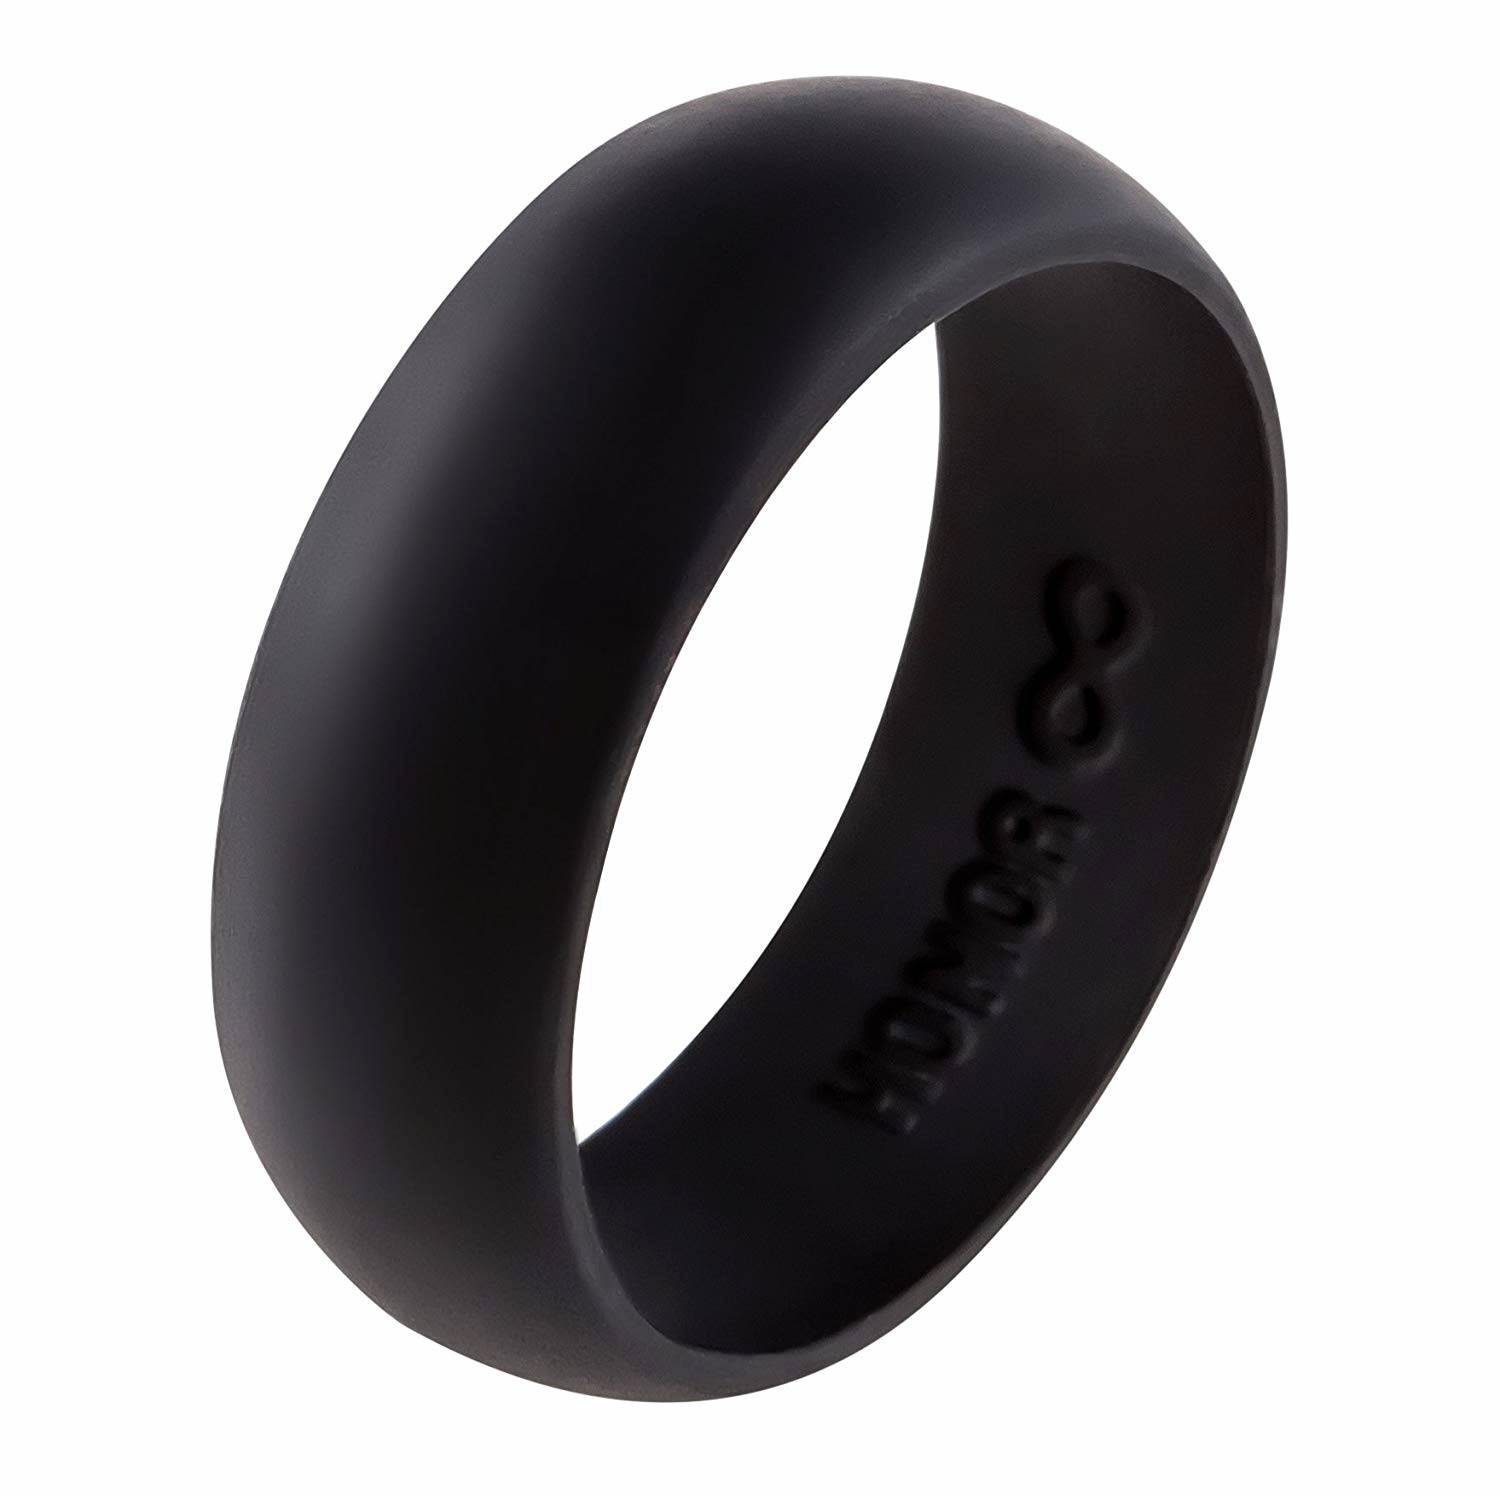 Honor Gear Eternity Silicone Wedding Ring for Men